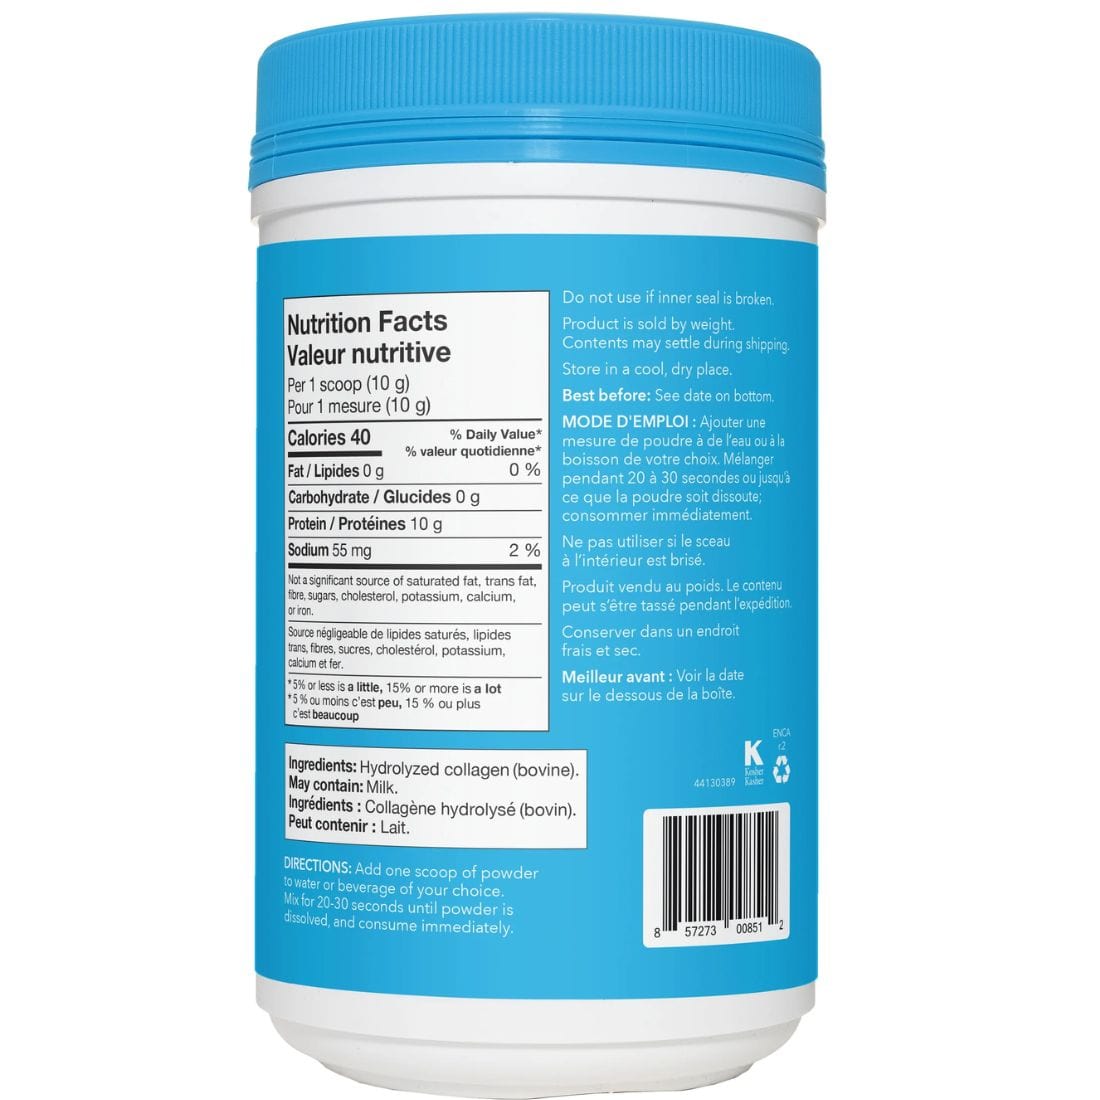 Vital Proteins Collagen Peptides (Grass Fed and Pasture Raised) - Unflavored